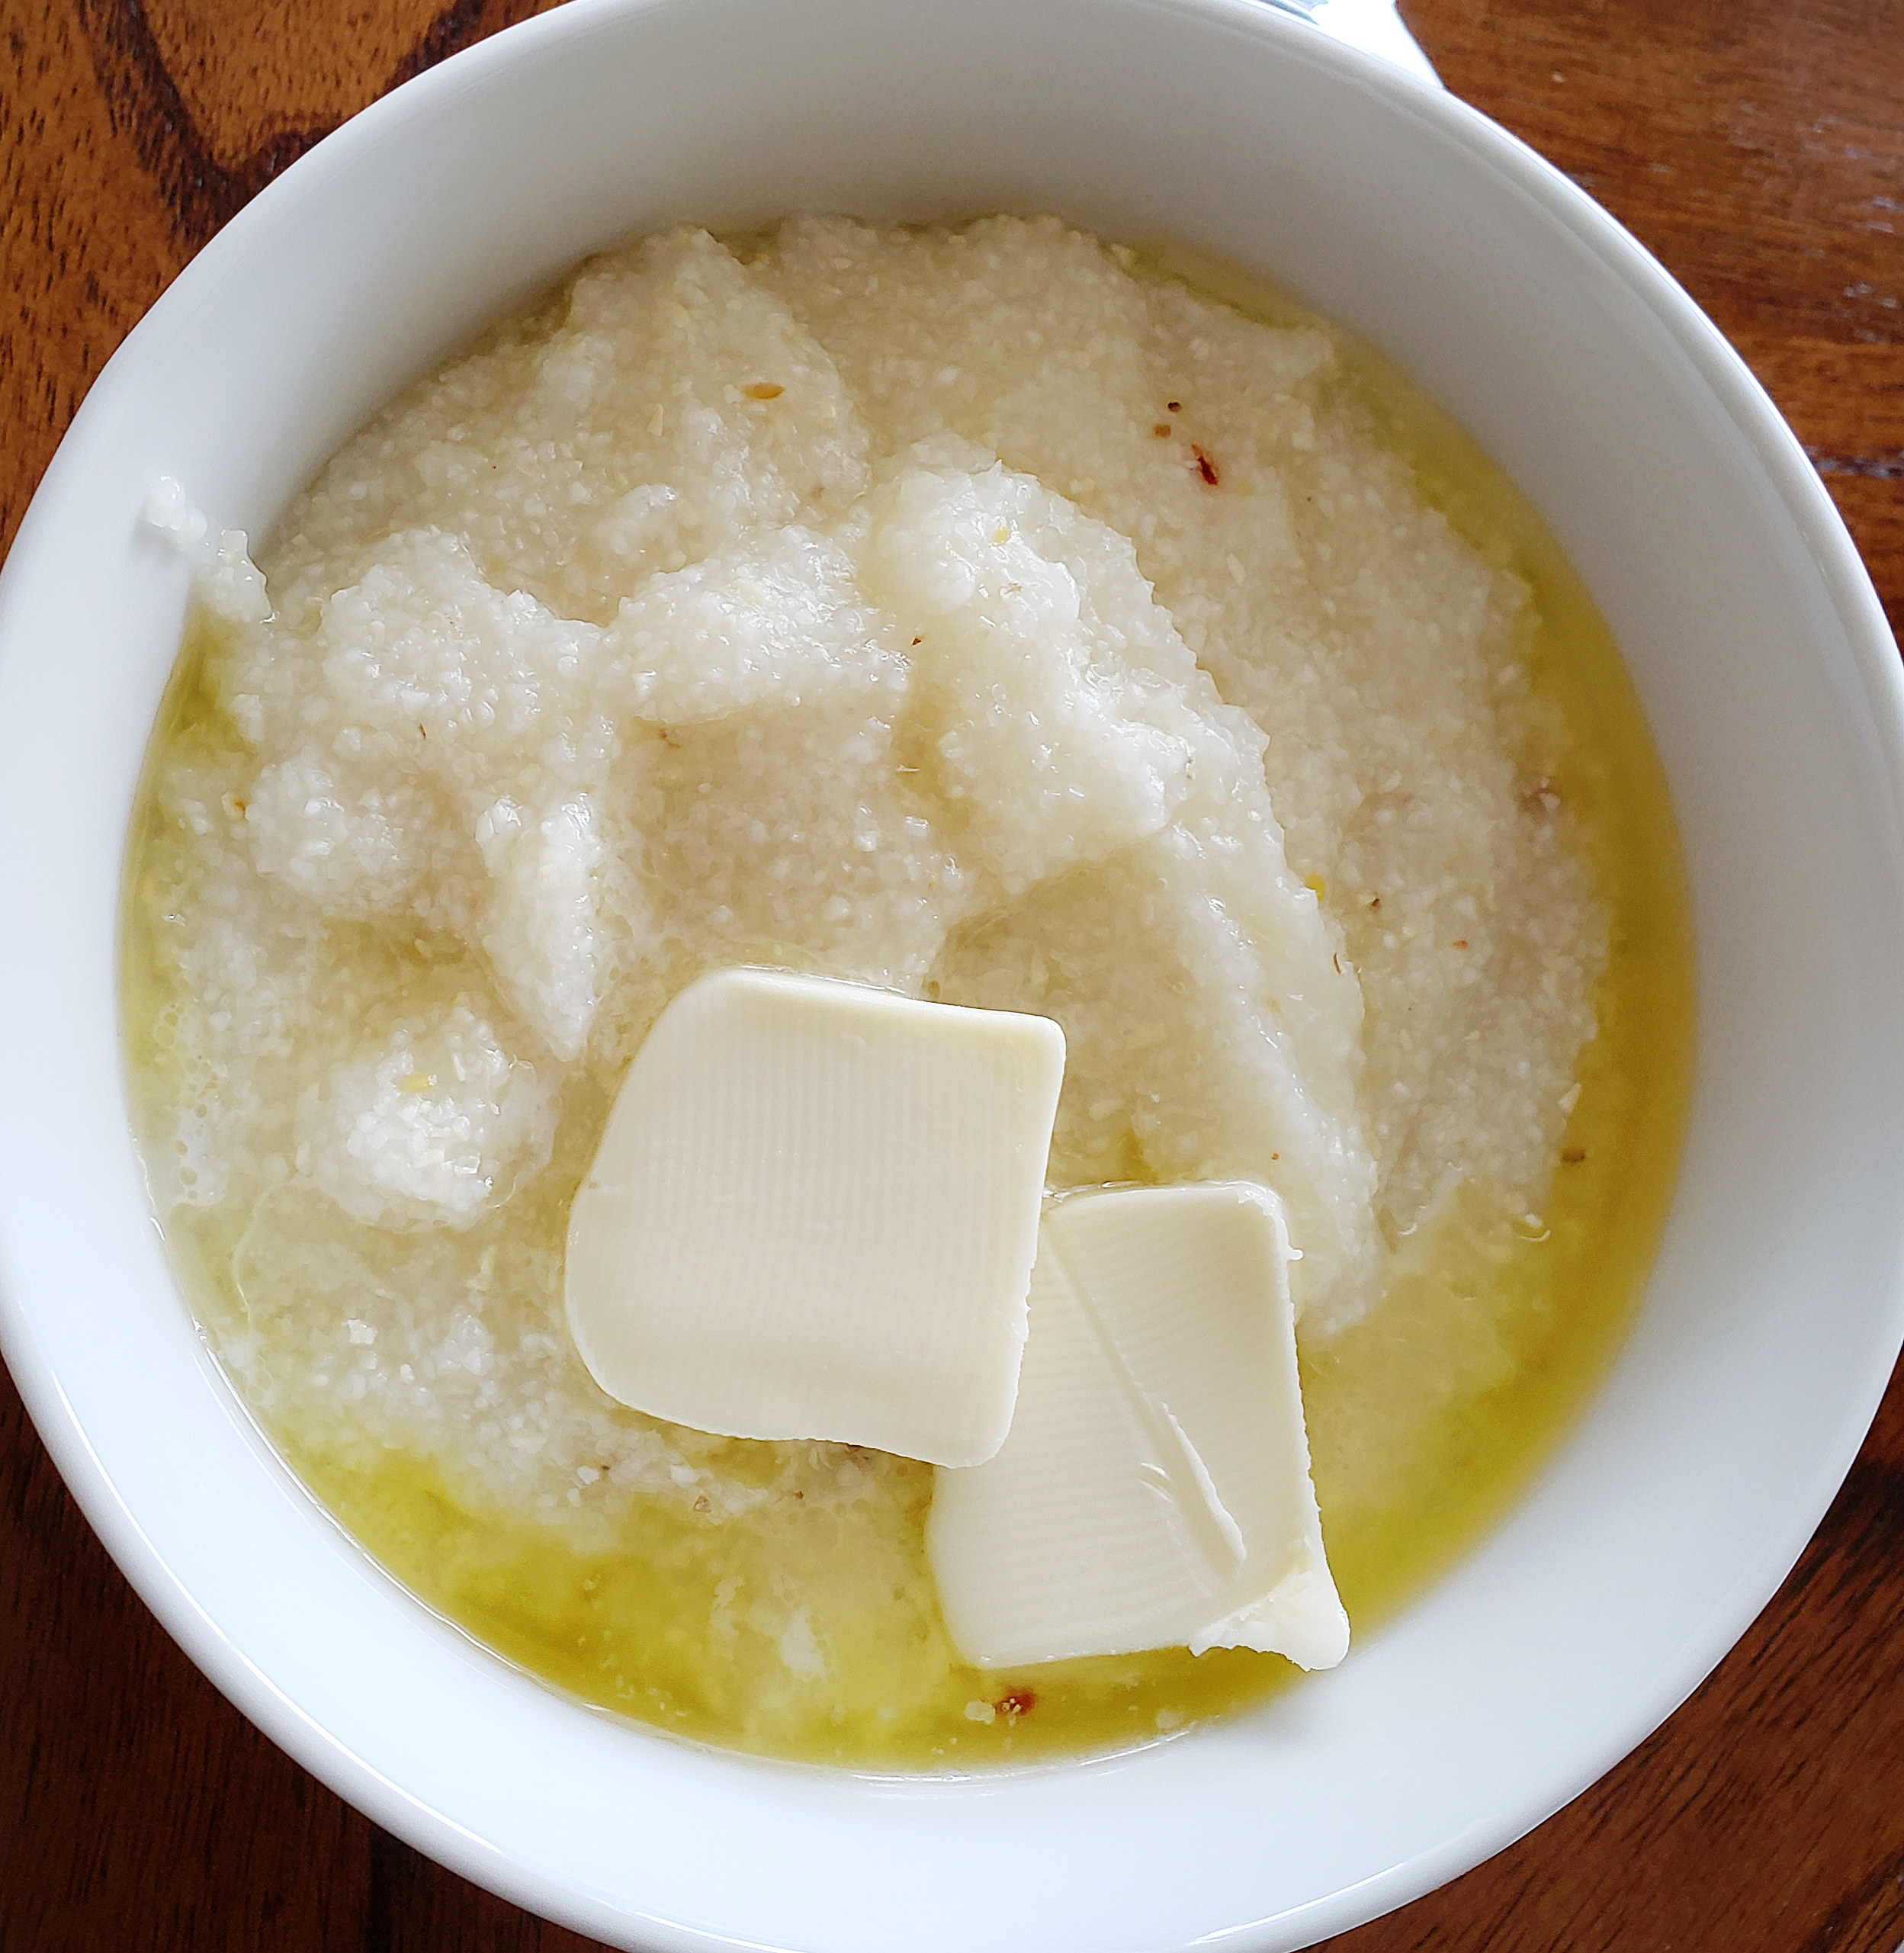 Grits with melted butter.